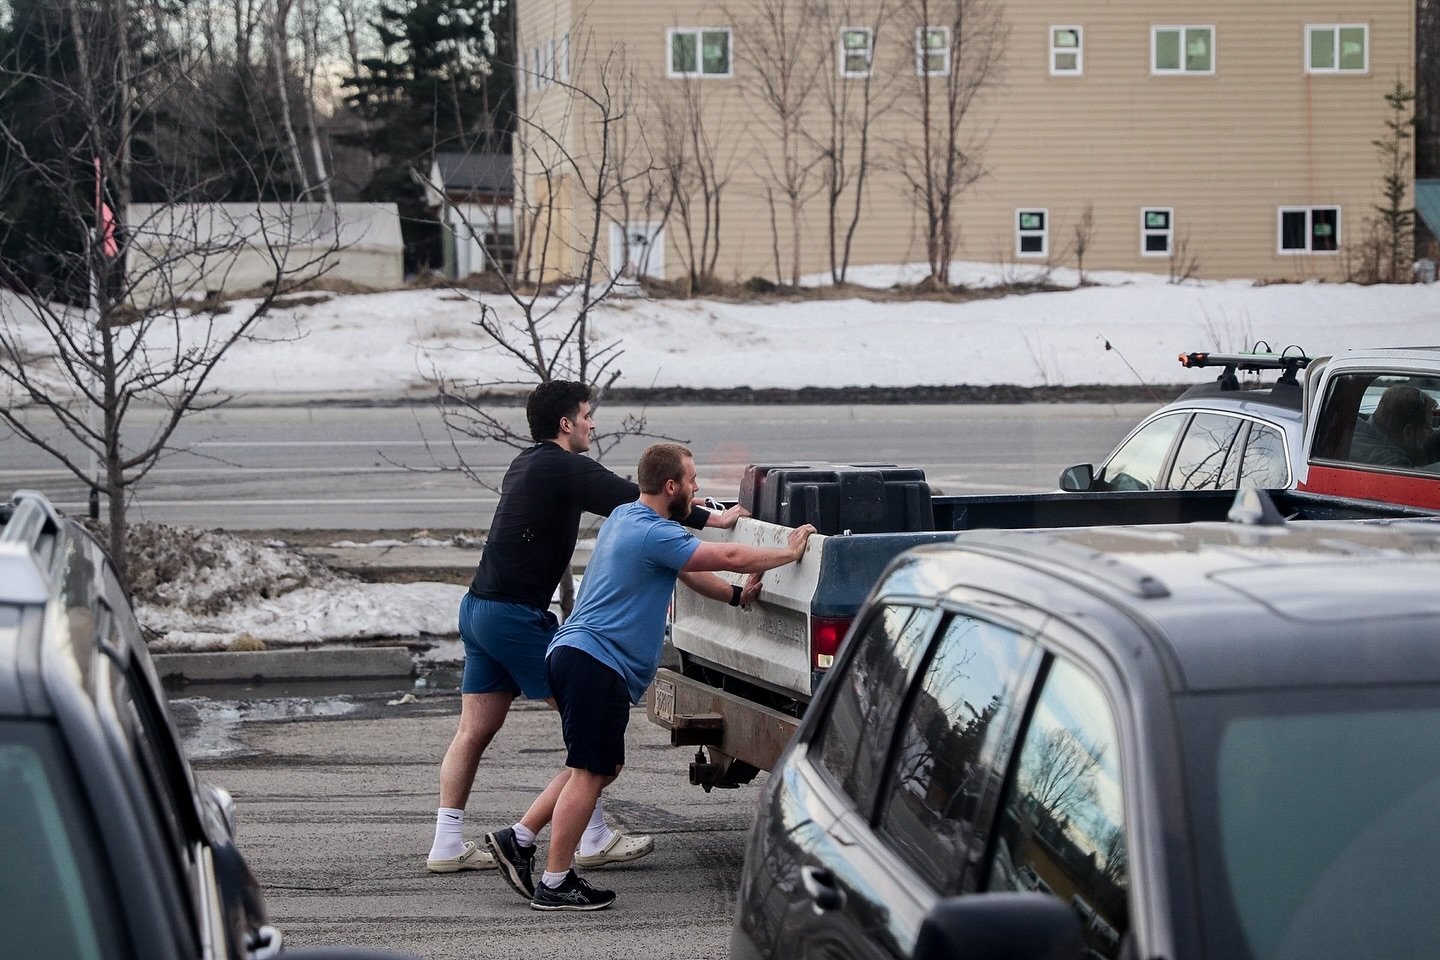 Take note: 🗒️ The ideal place to break down is in front of a @CrossFit gym. 💪🏼 #functionalfitness #wevegotthis  @noahroetman @timsorensen32